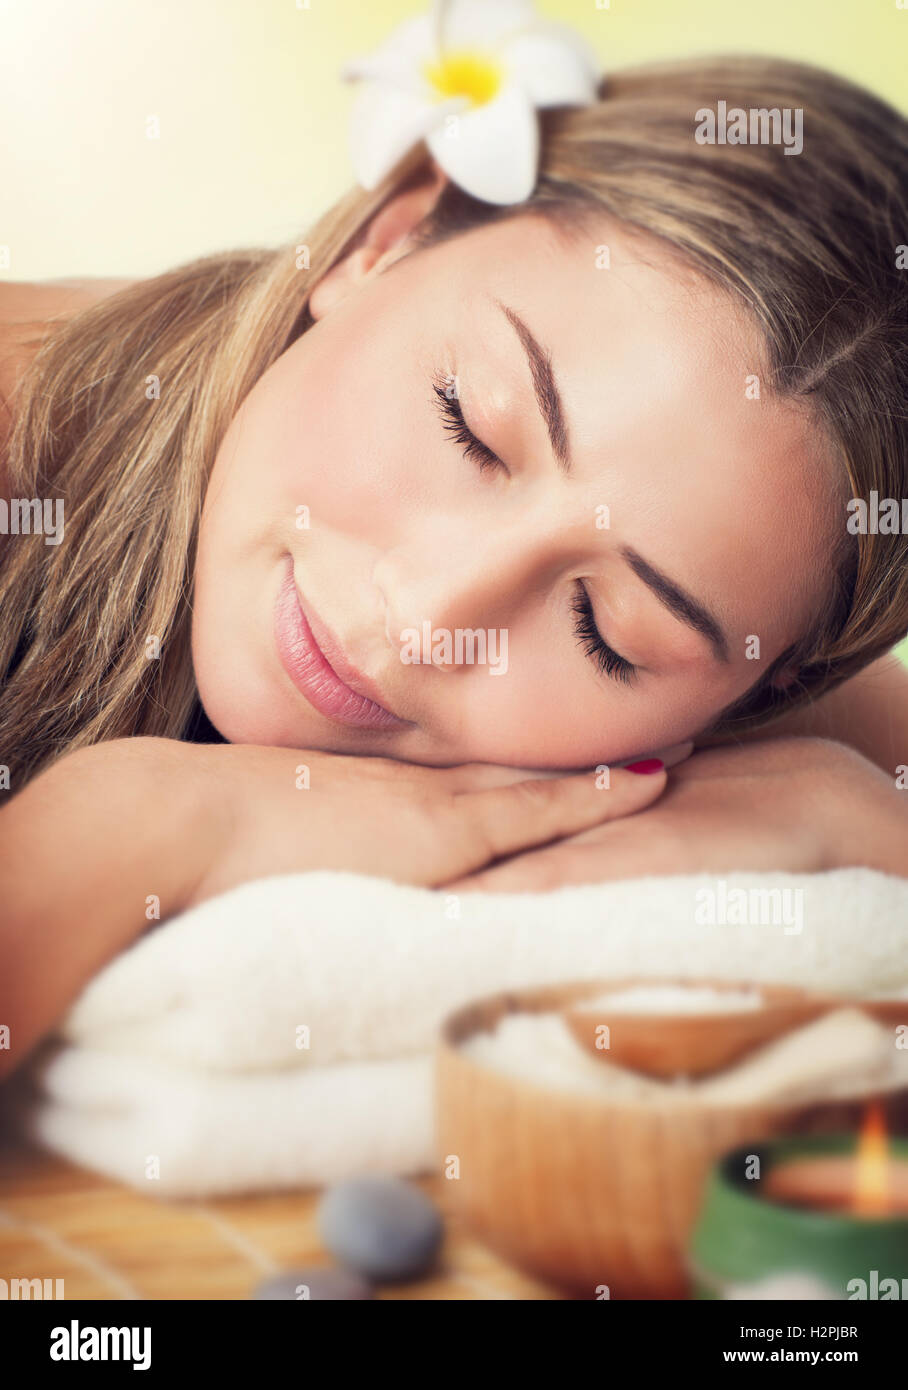 Closeup portrait of a peaceful woman with closed eyes lying down on a massage table in the spa salon, luxury healthy lifestyle Stock Photo